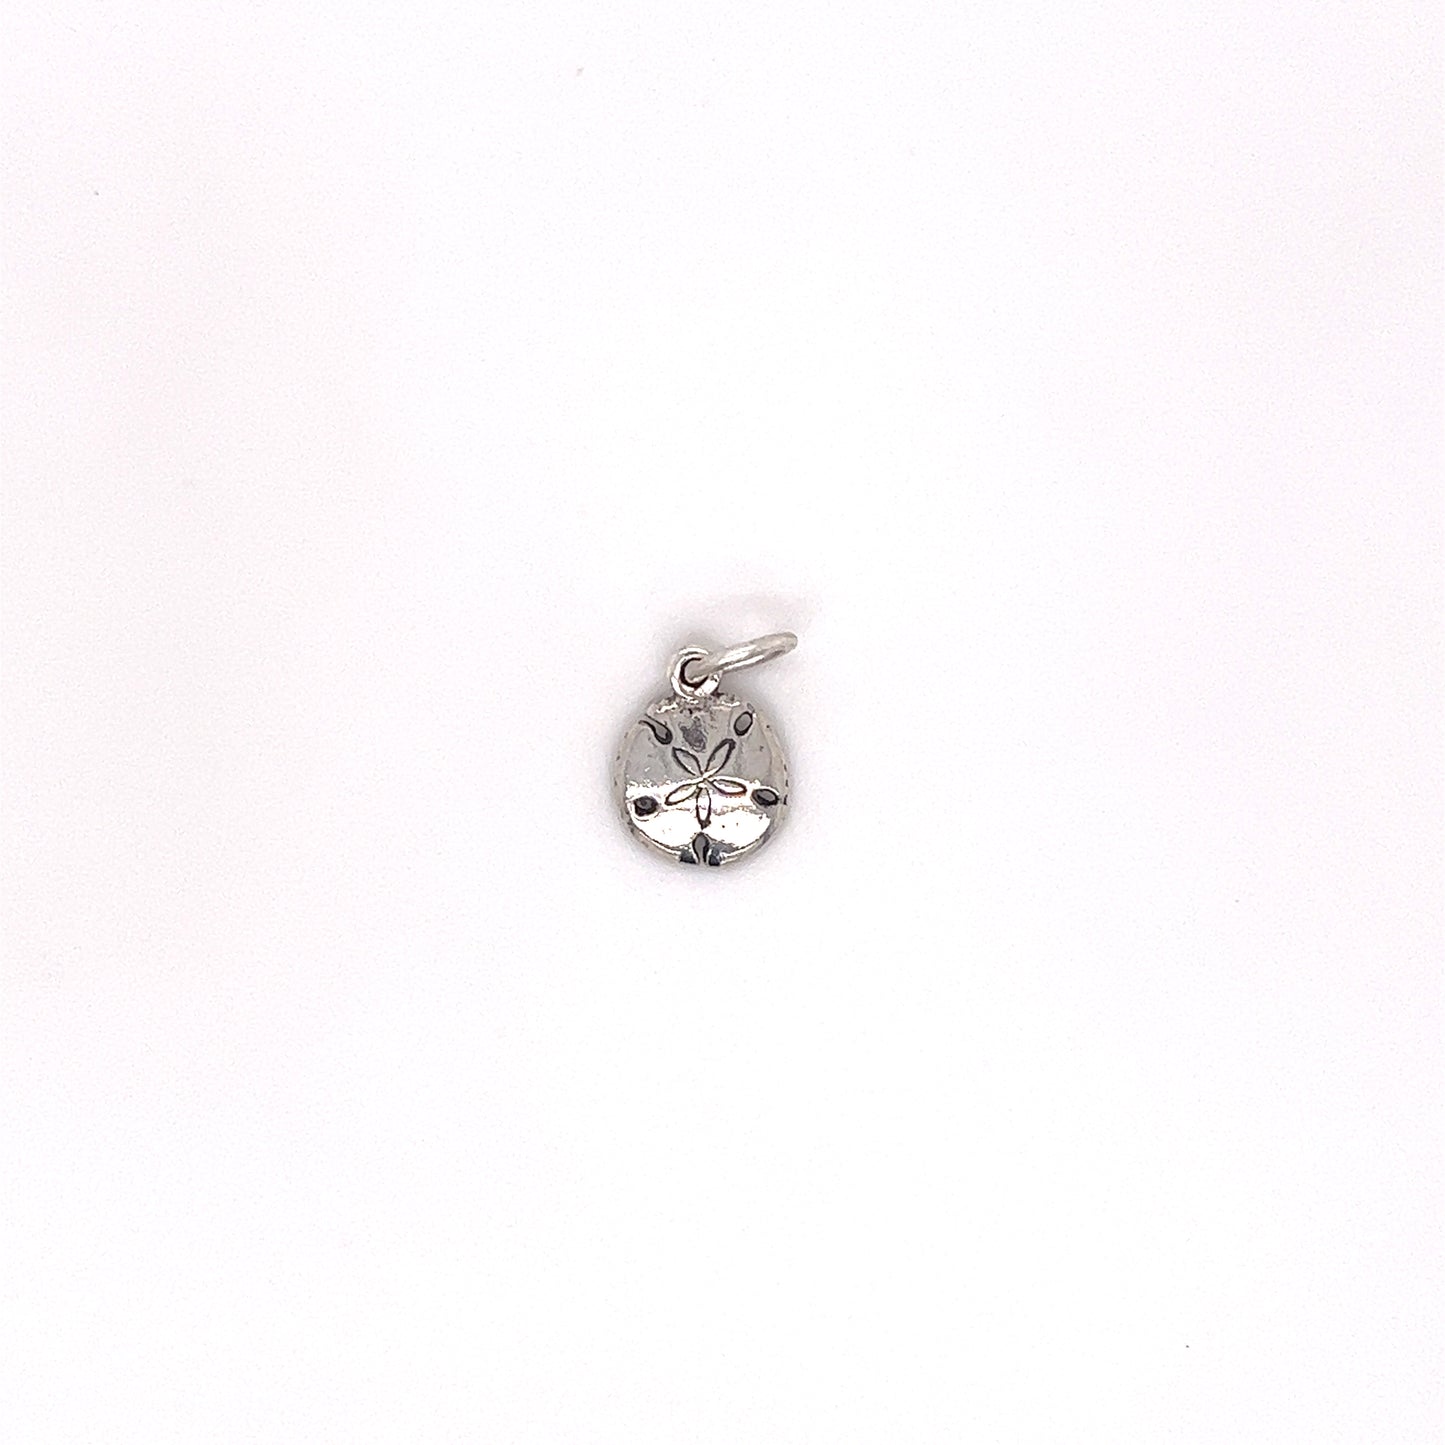 A small silver Tiny Sand Dollar Charm with beach vibes on a white background by Super Silver.